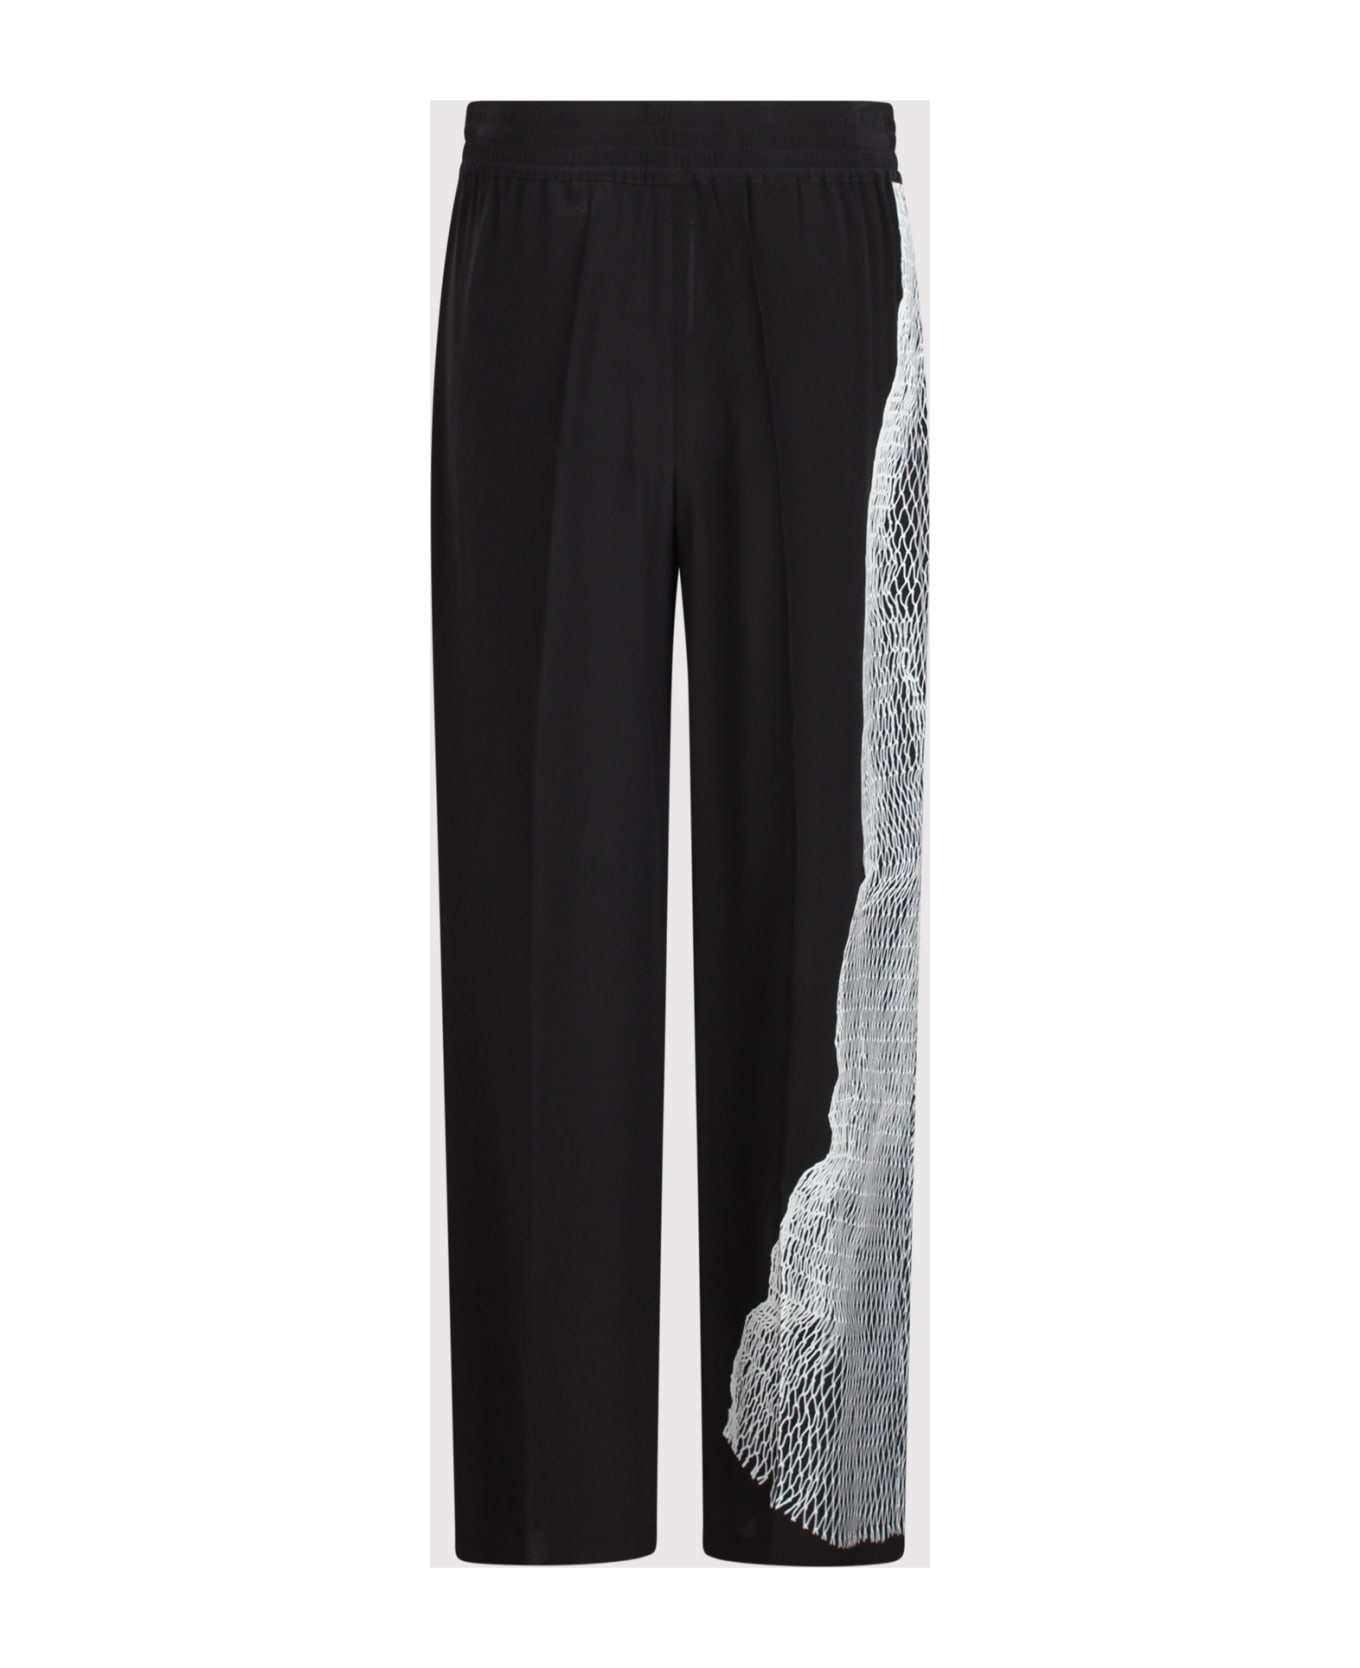 Victoria Beckham Wide-leg Trousers With Graphic Mesh Print